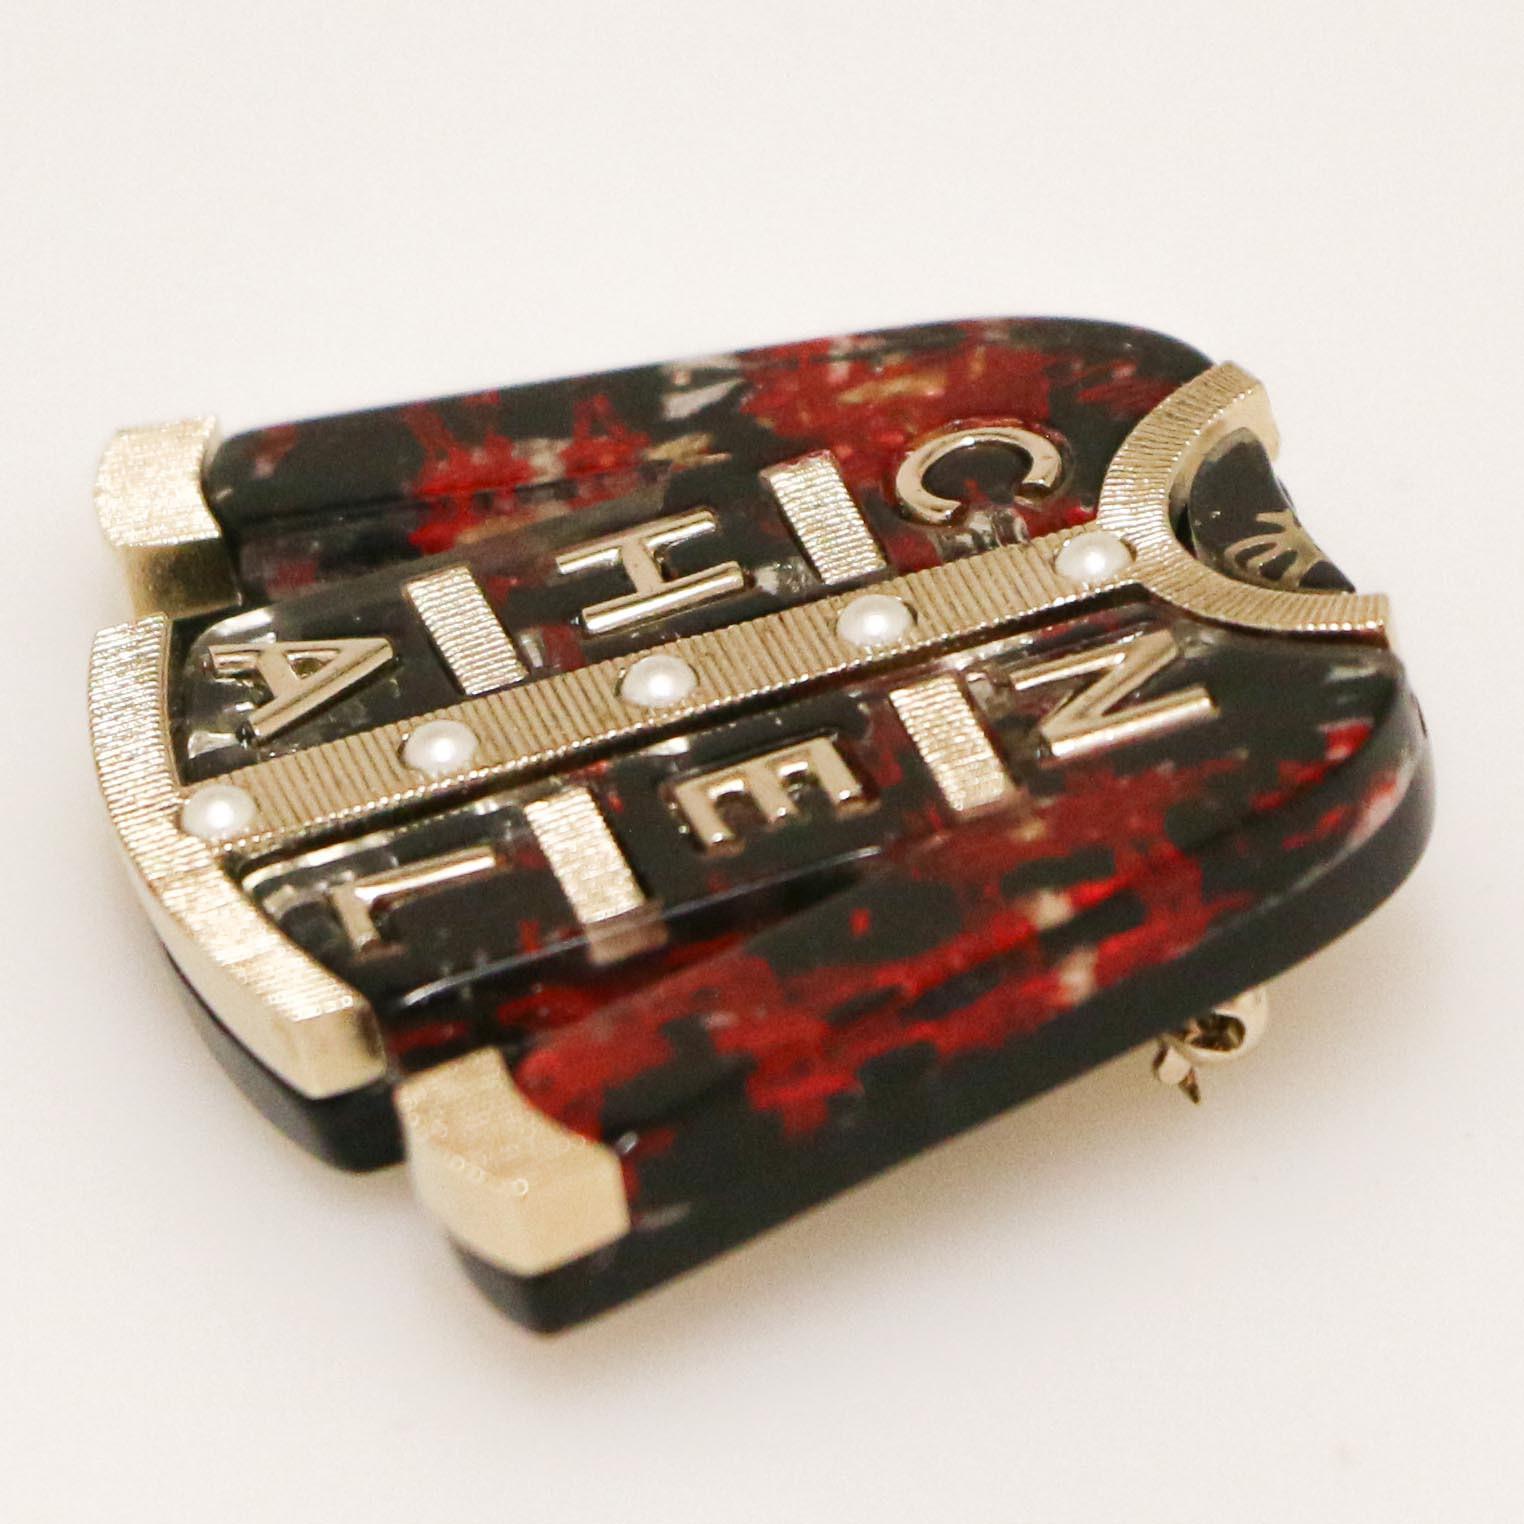 CHANEL Tweed Jacket  C H A N E L Brooch in gilt metal, black and red resin, pearls beads.
In very good condition
Made in Italy.
Size: 5.8 x 5.4cm
Stamp: yes - Collection P 2011.
Will be delivered in a CHANEL dustbag,